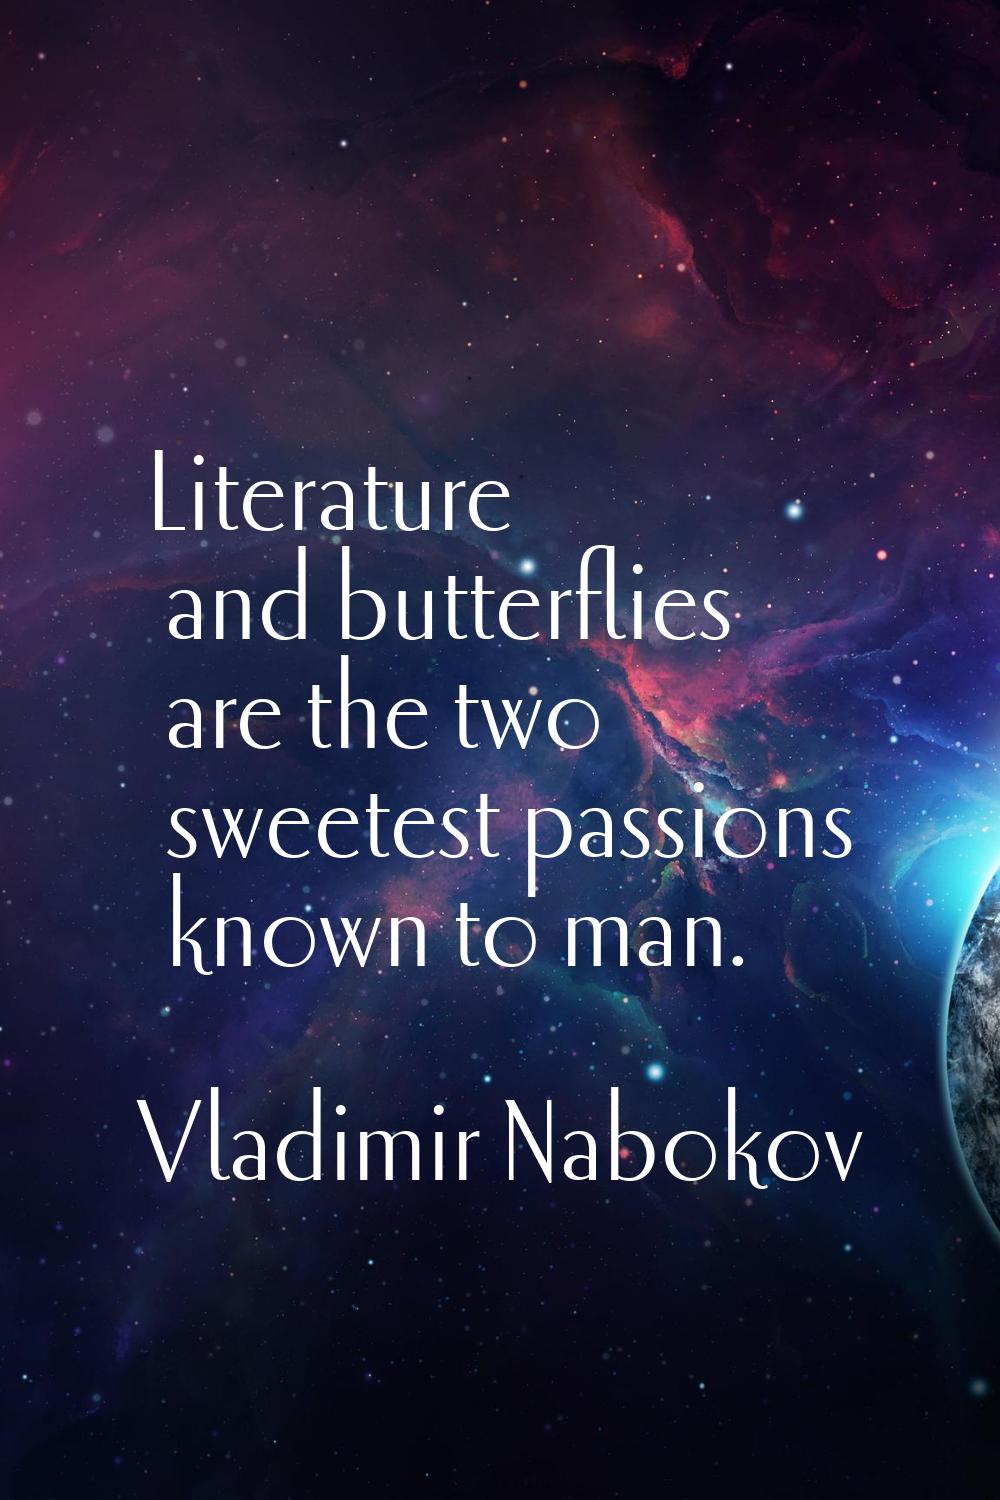 Literature and butterflies are the two sweetest passions known to man.